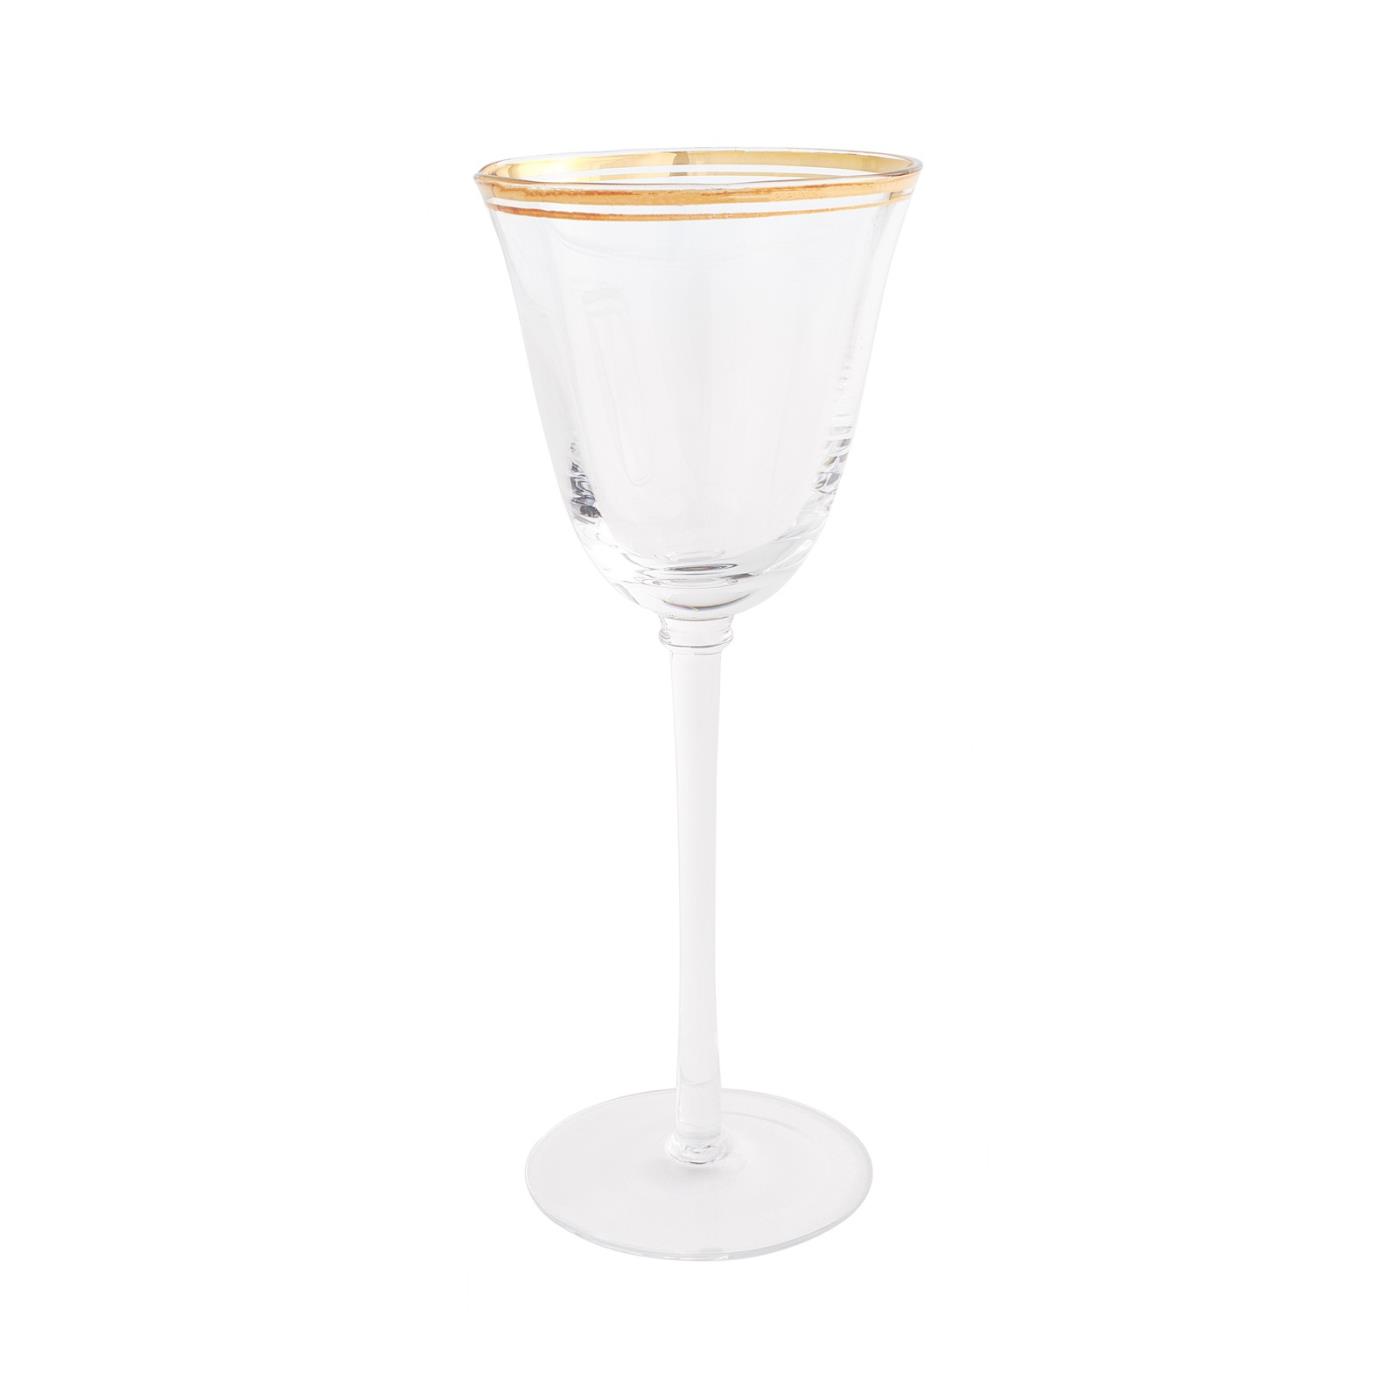 Windsor Gold Collection -  White Wine Glass 6 oz